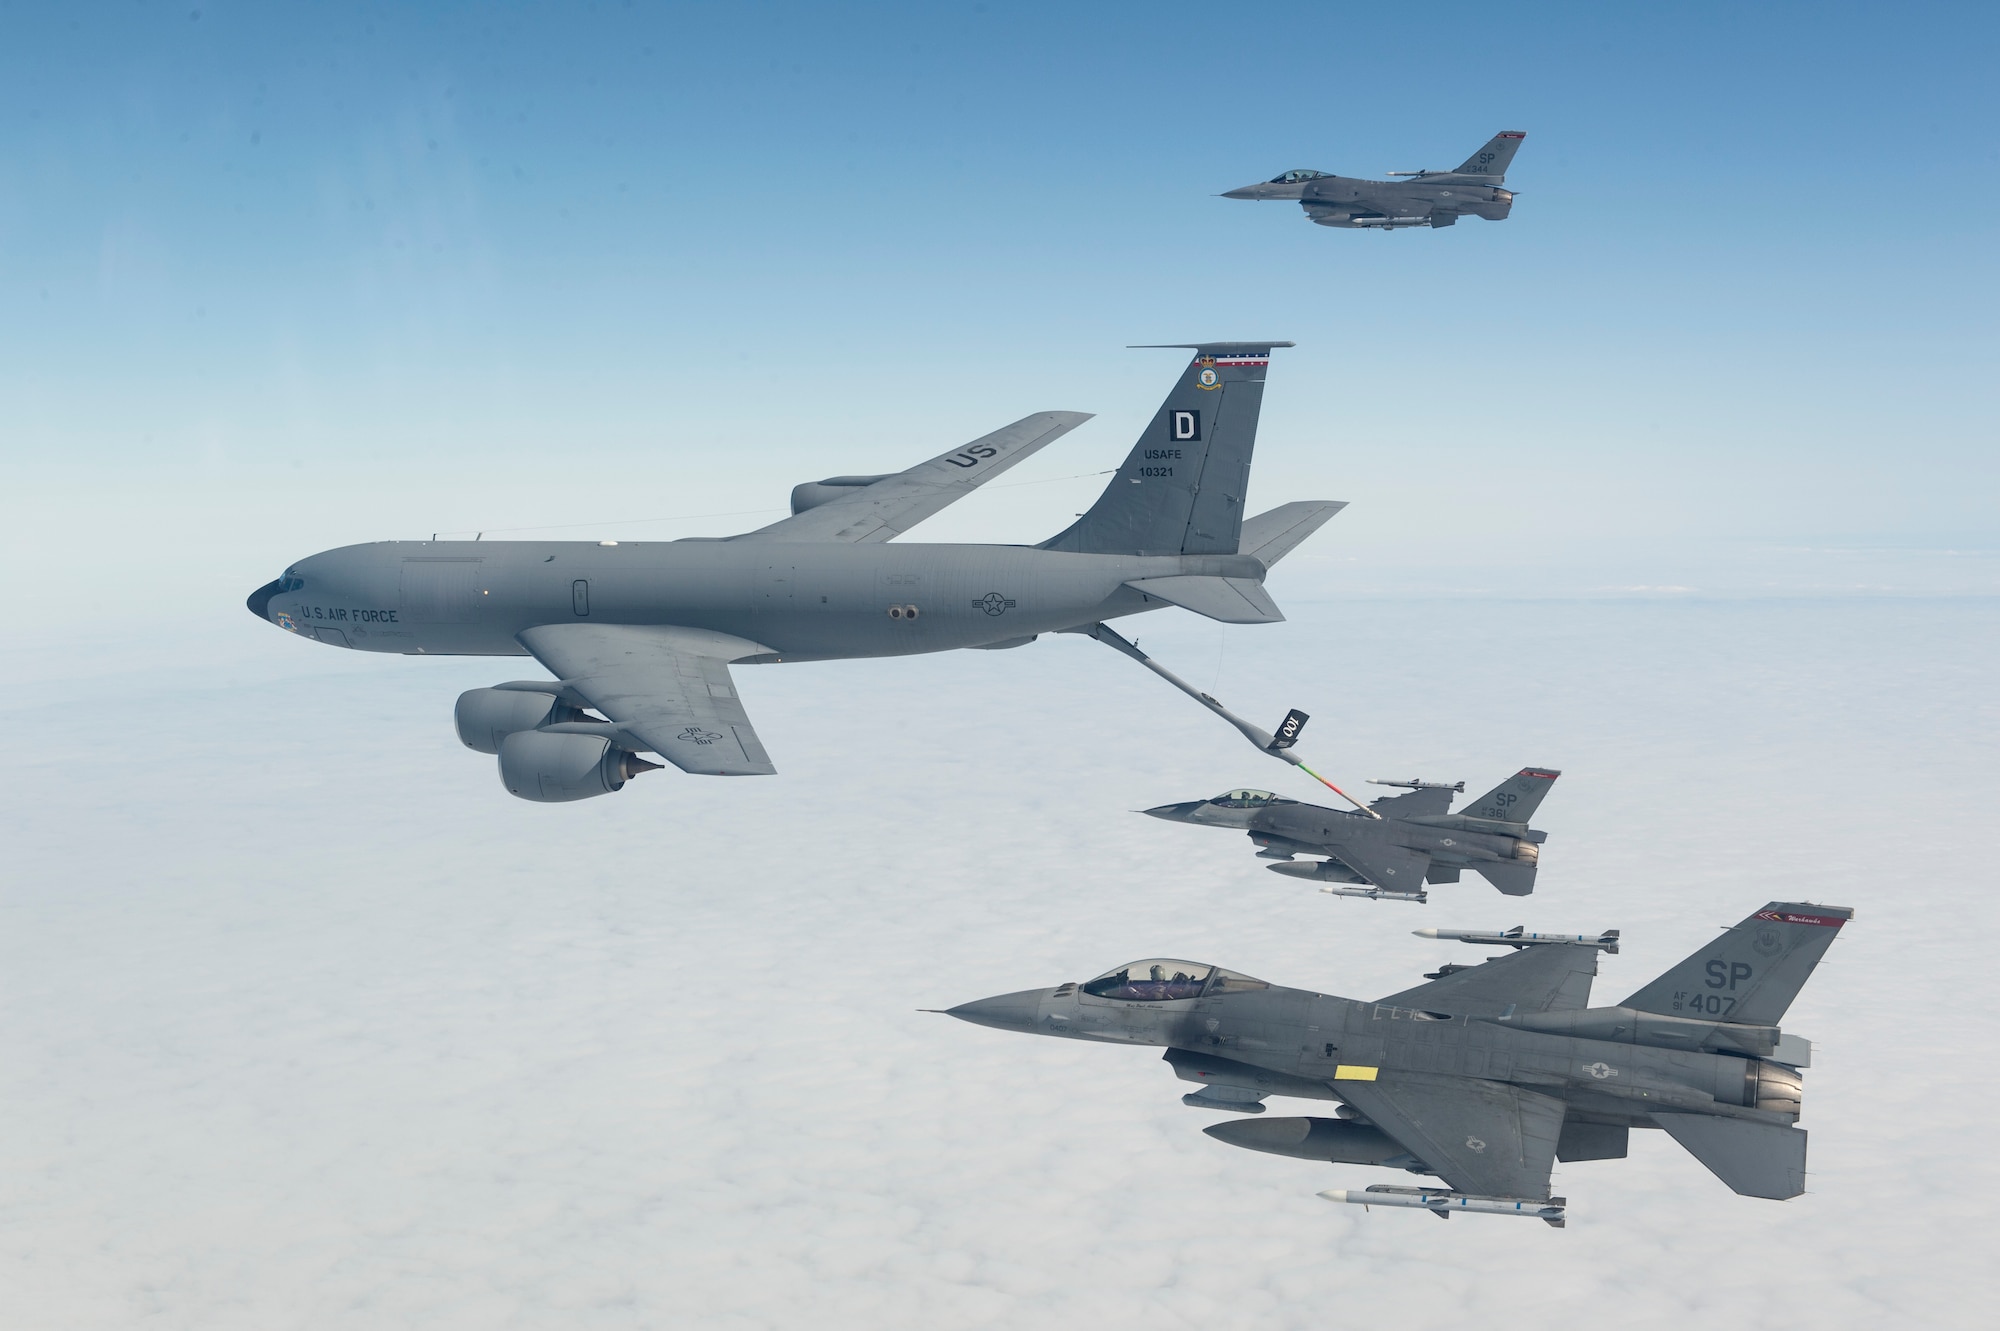 F-16 Fighting Falcons from the 408th Fighter Squadron at Spangdahlem Air Base, Germany, conduct aerial refueling with a KC-135 Stratotanker from the 100th Air Refueling Wing at Royal Air Force Mildenhall, England, during a training sortie Sept. 9, 2015, over the U.K. (U.S. Air Force photo/Tech. Sgt. Jason Robertson)